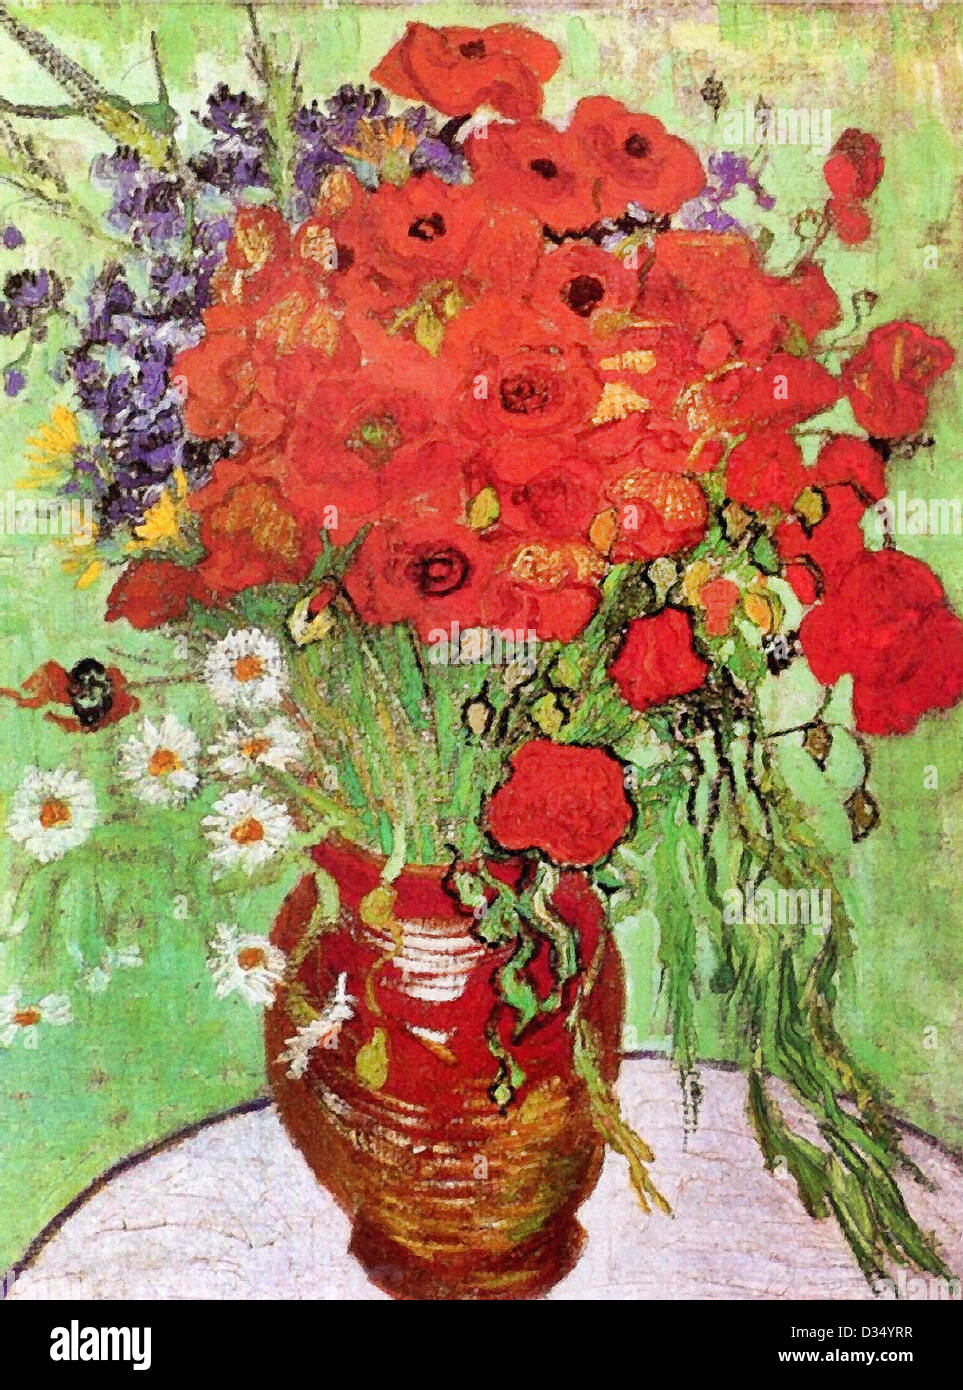 Vincent van Gogh, Red Poppies and Daisies. 1890. Post-Impressionism. Oil on canvas. Albright Knox Art Gallery, Buffalo, NY, USA. Stock Photo